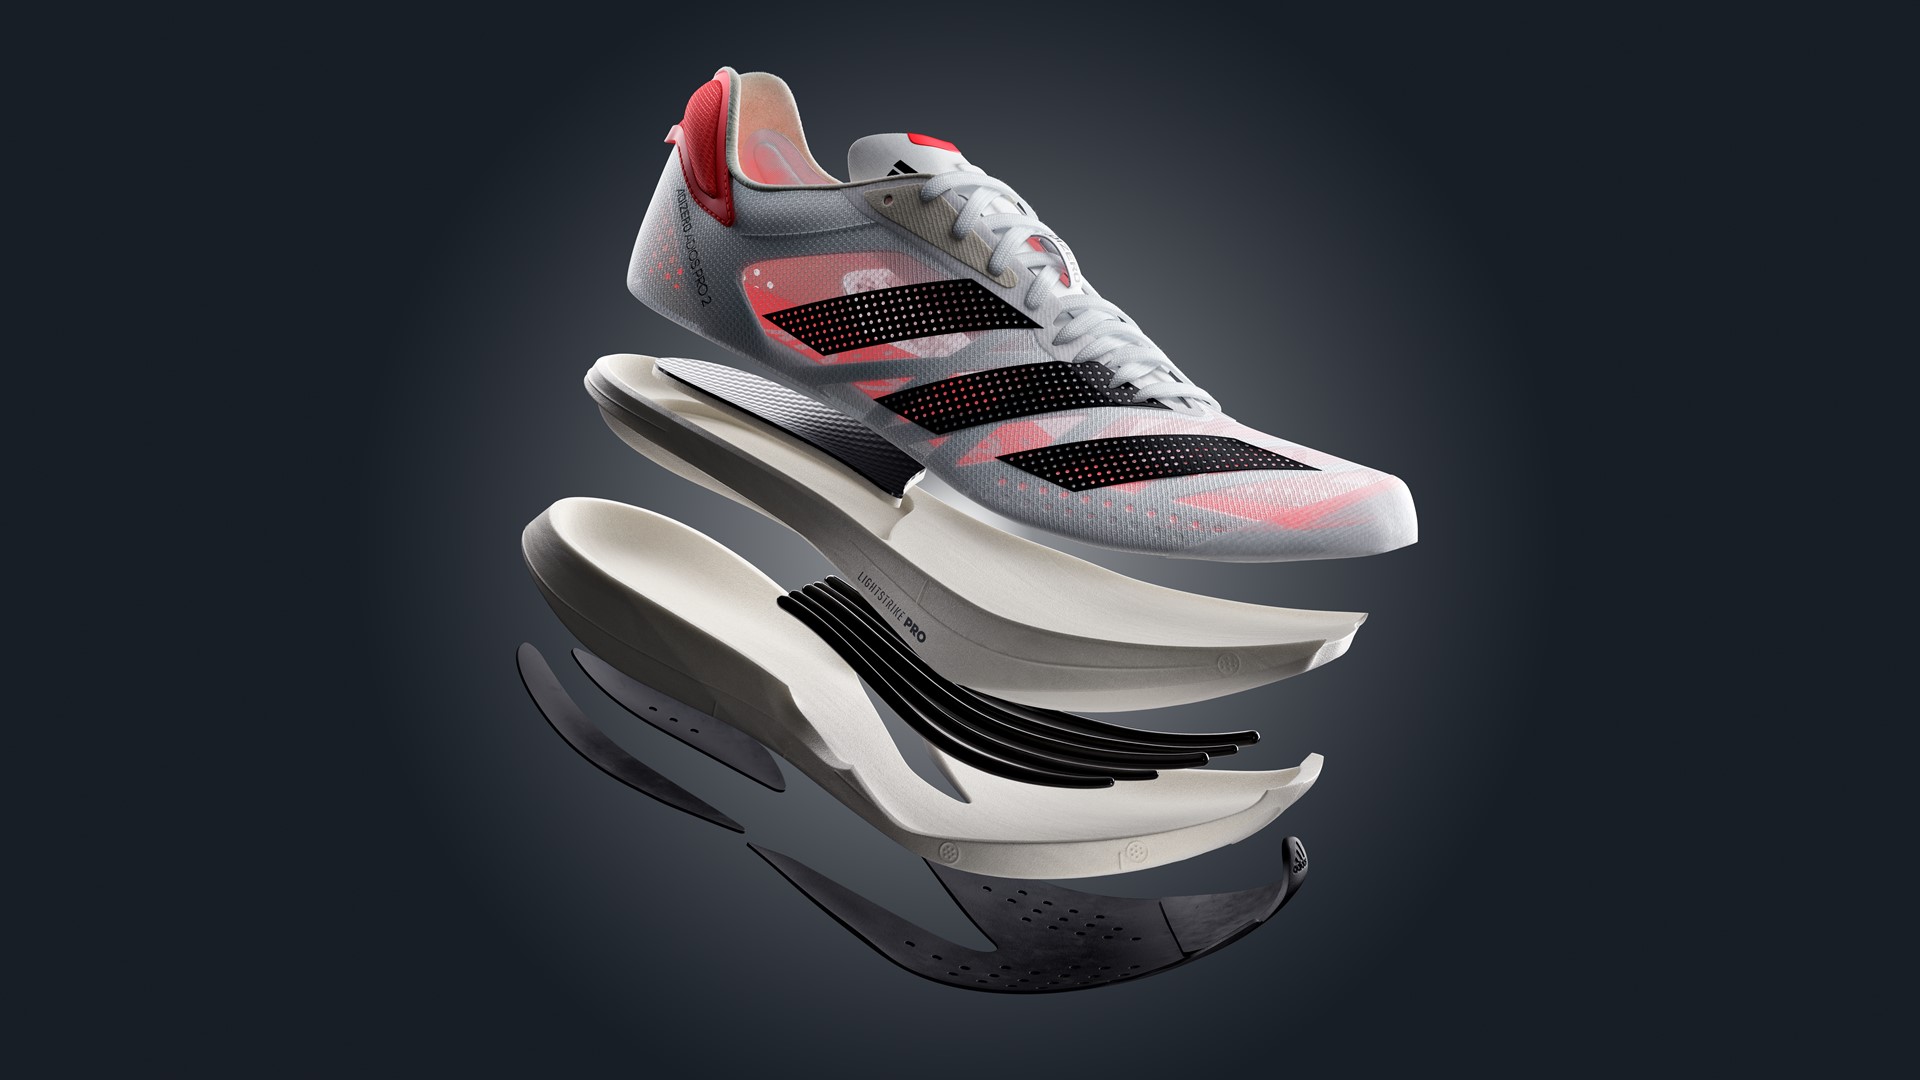 THE LATEST ADIDAS ADIZERO FOOTWEAR EVOLVING FAST FOR THE ROAD AND THE